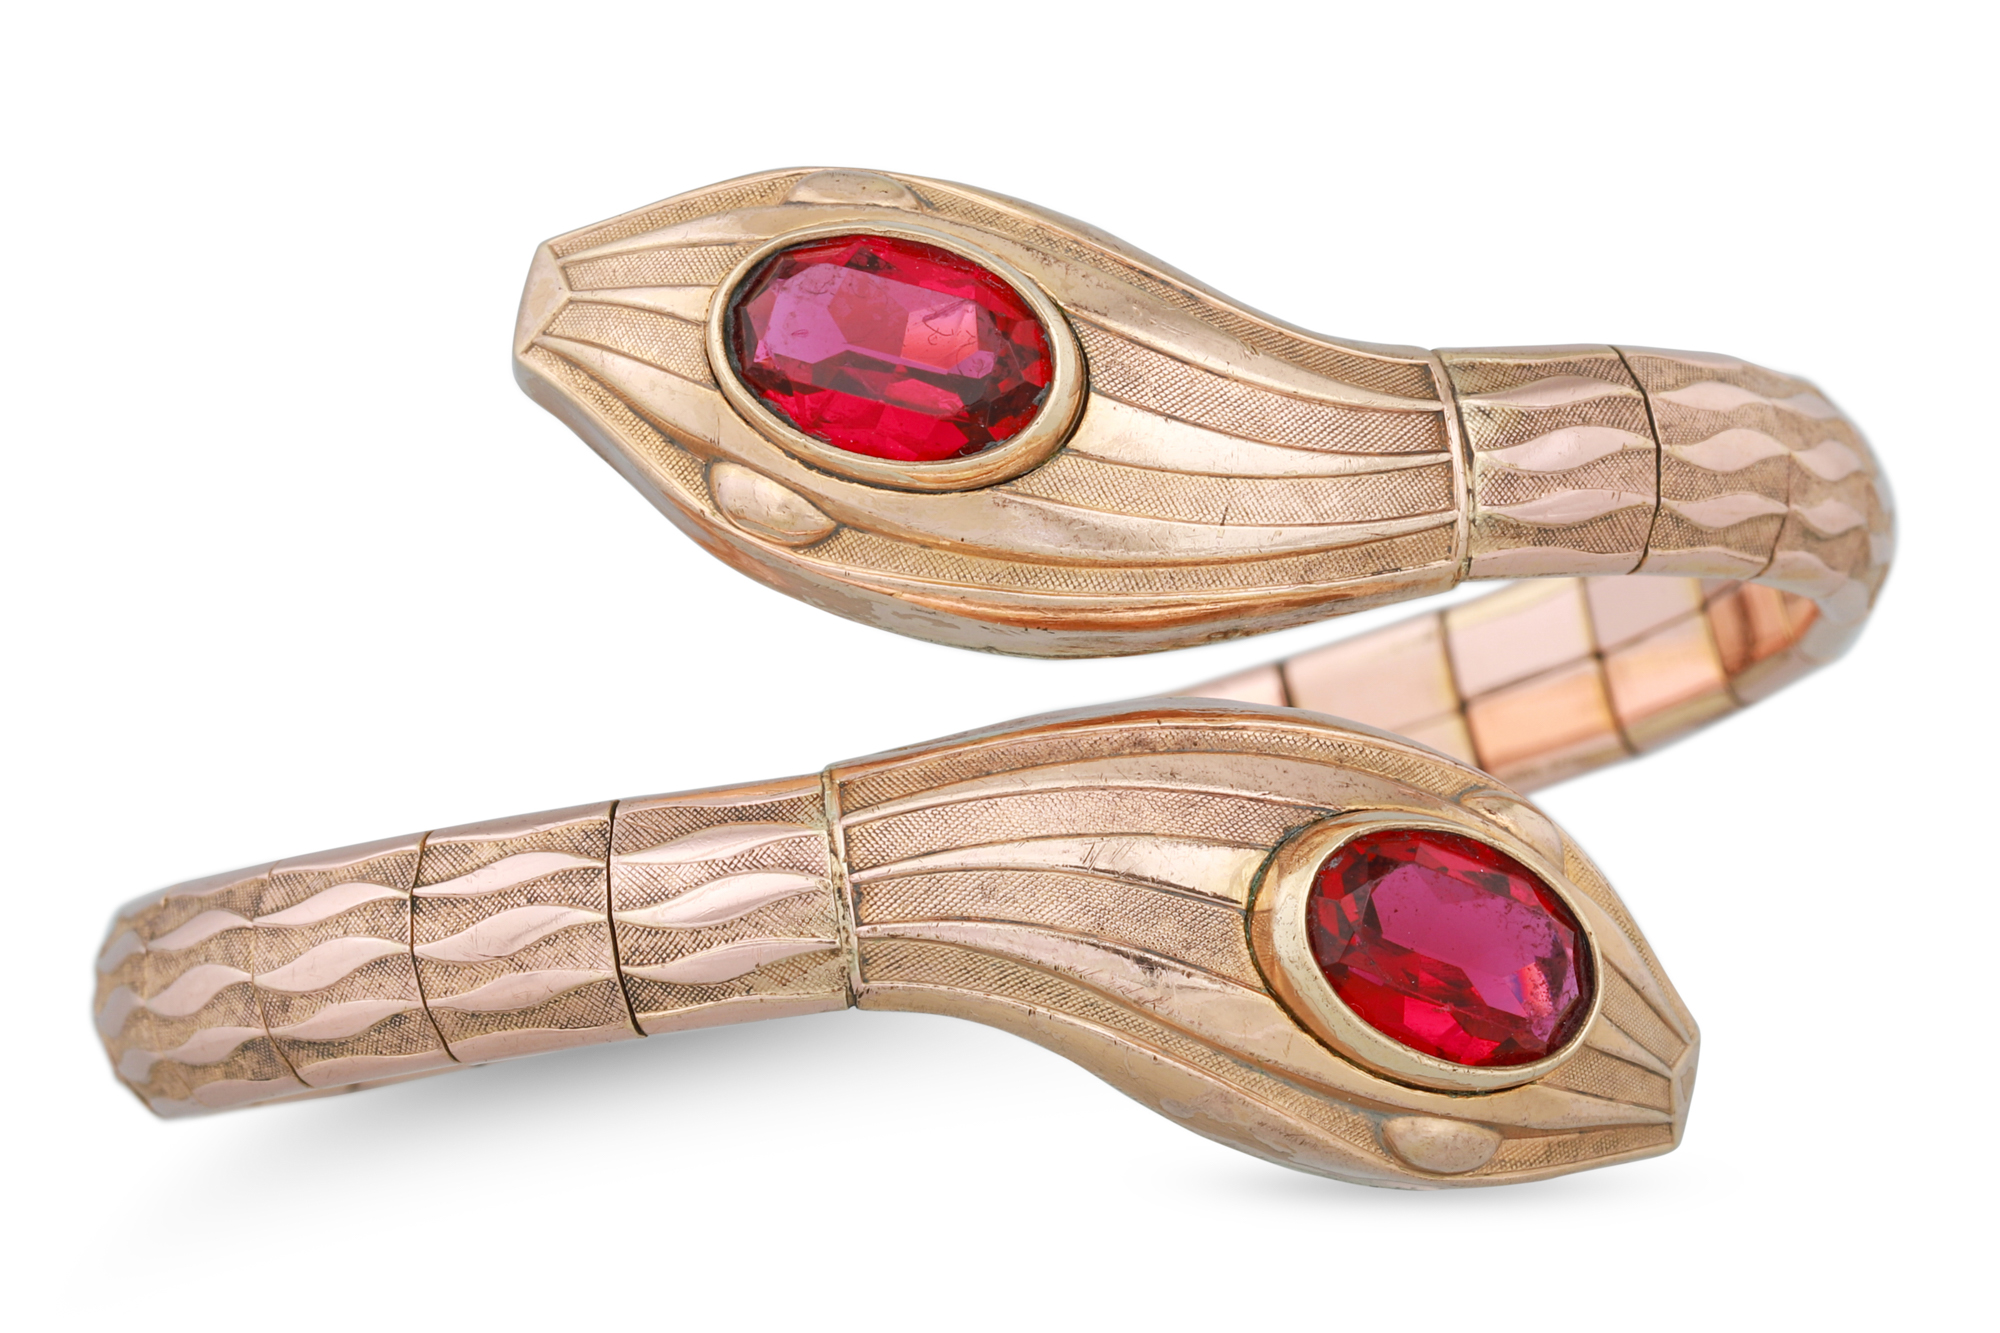 AN ART DECO ROLLED GOLD BRACELET, in the form of a snake, set with red glass, by Andreas Daub, ca